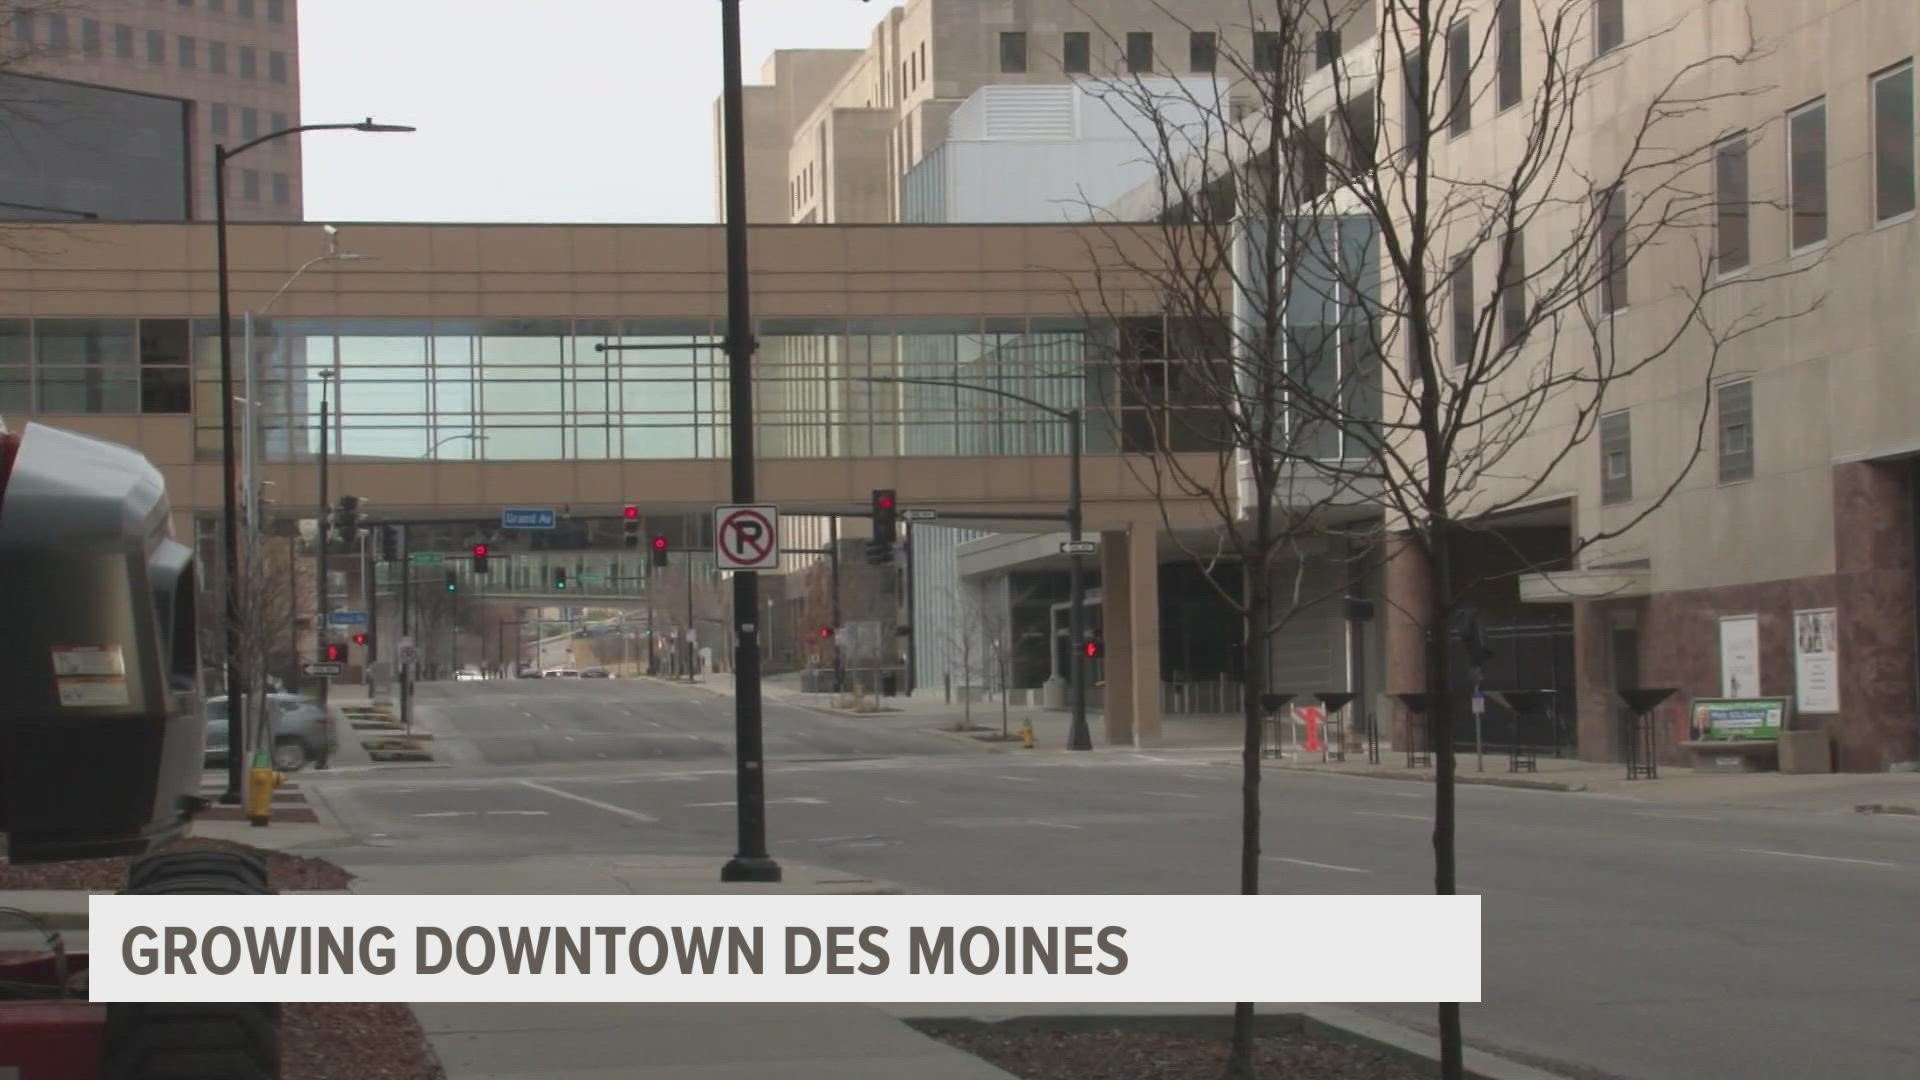 Greater Des Moines Partnership released a study that talks about ways to help the downtown area grow.